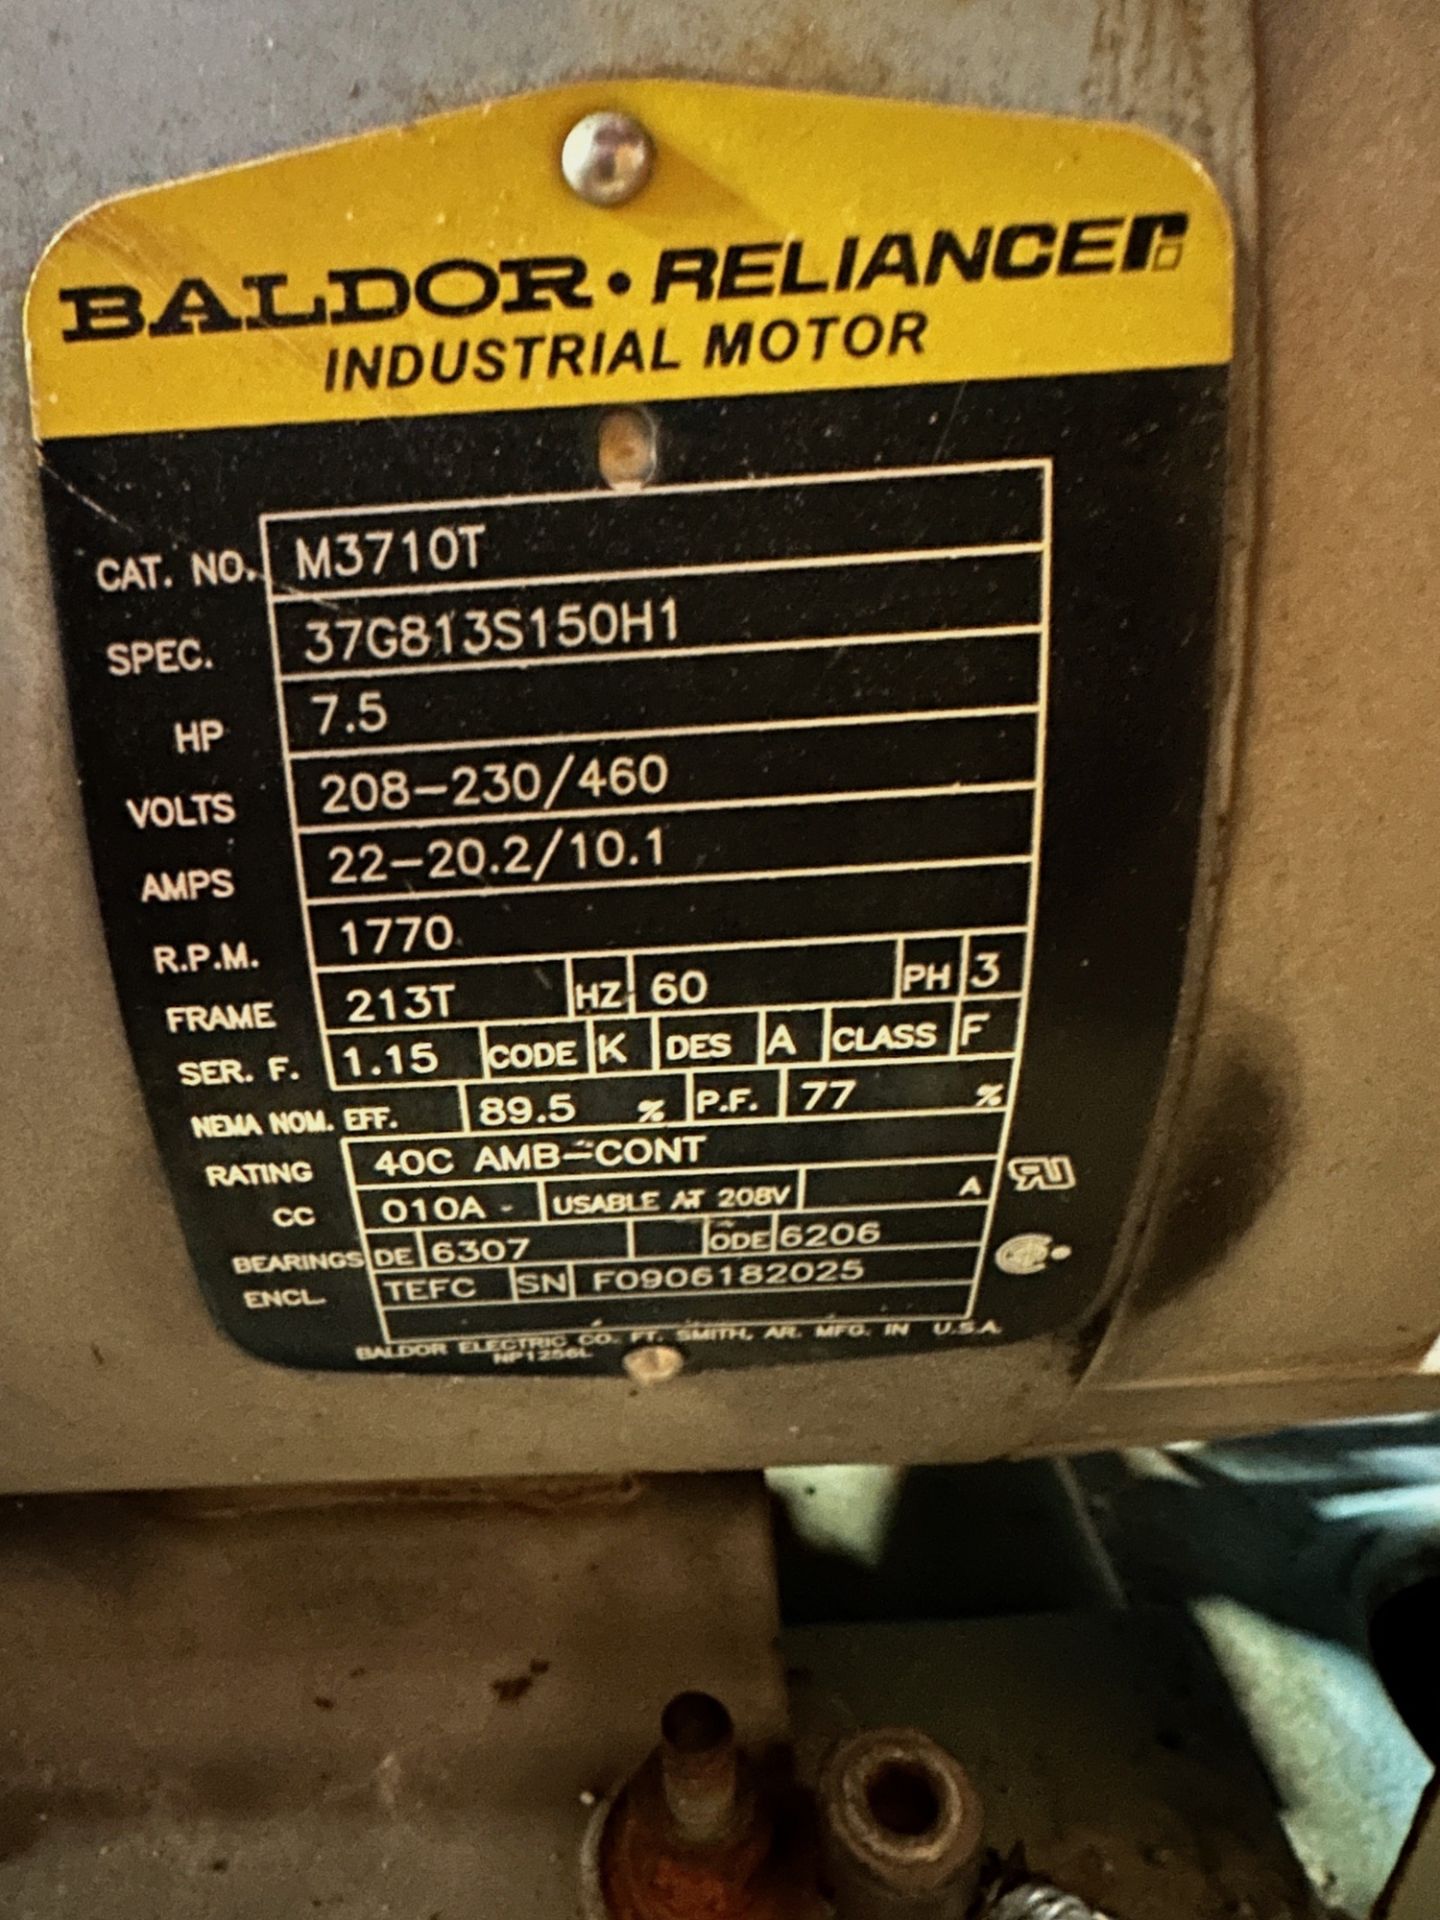 Baldor Reliance 7.5 HP Industrial Motor with Goulds Centrifugal Pump | Rig Fee $25 - Image 2 of 4